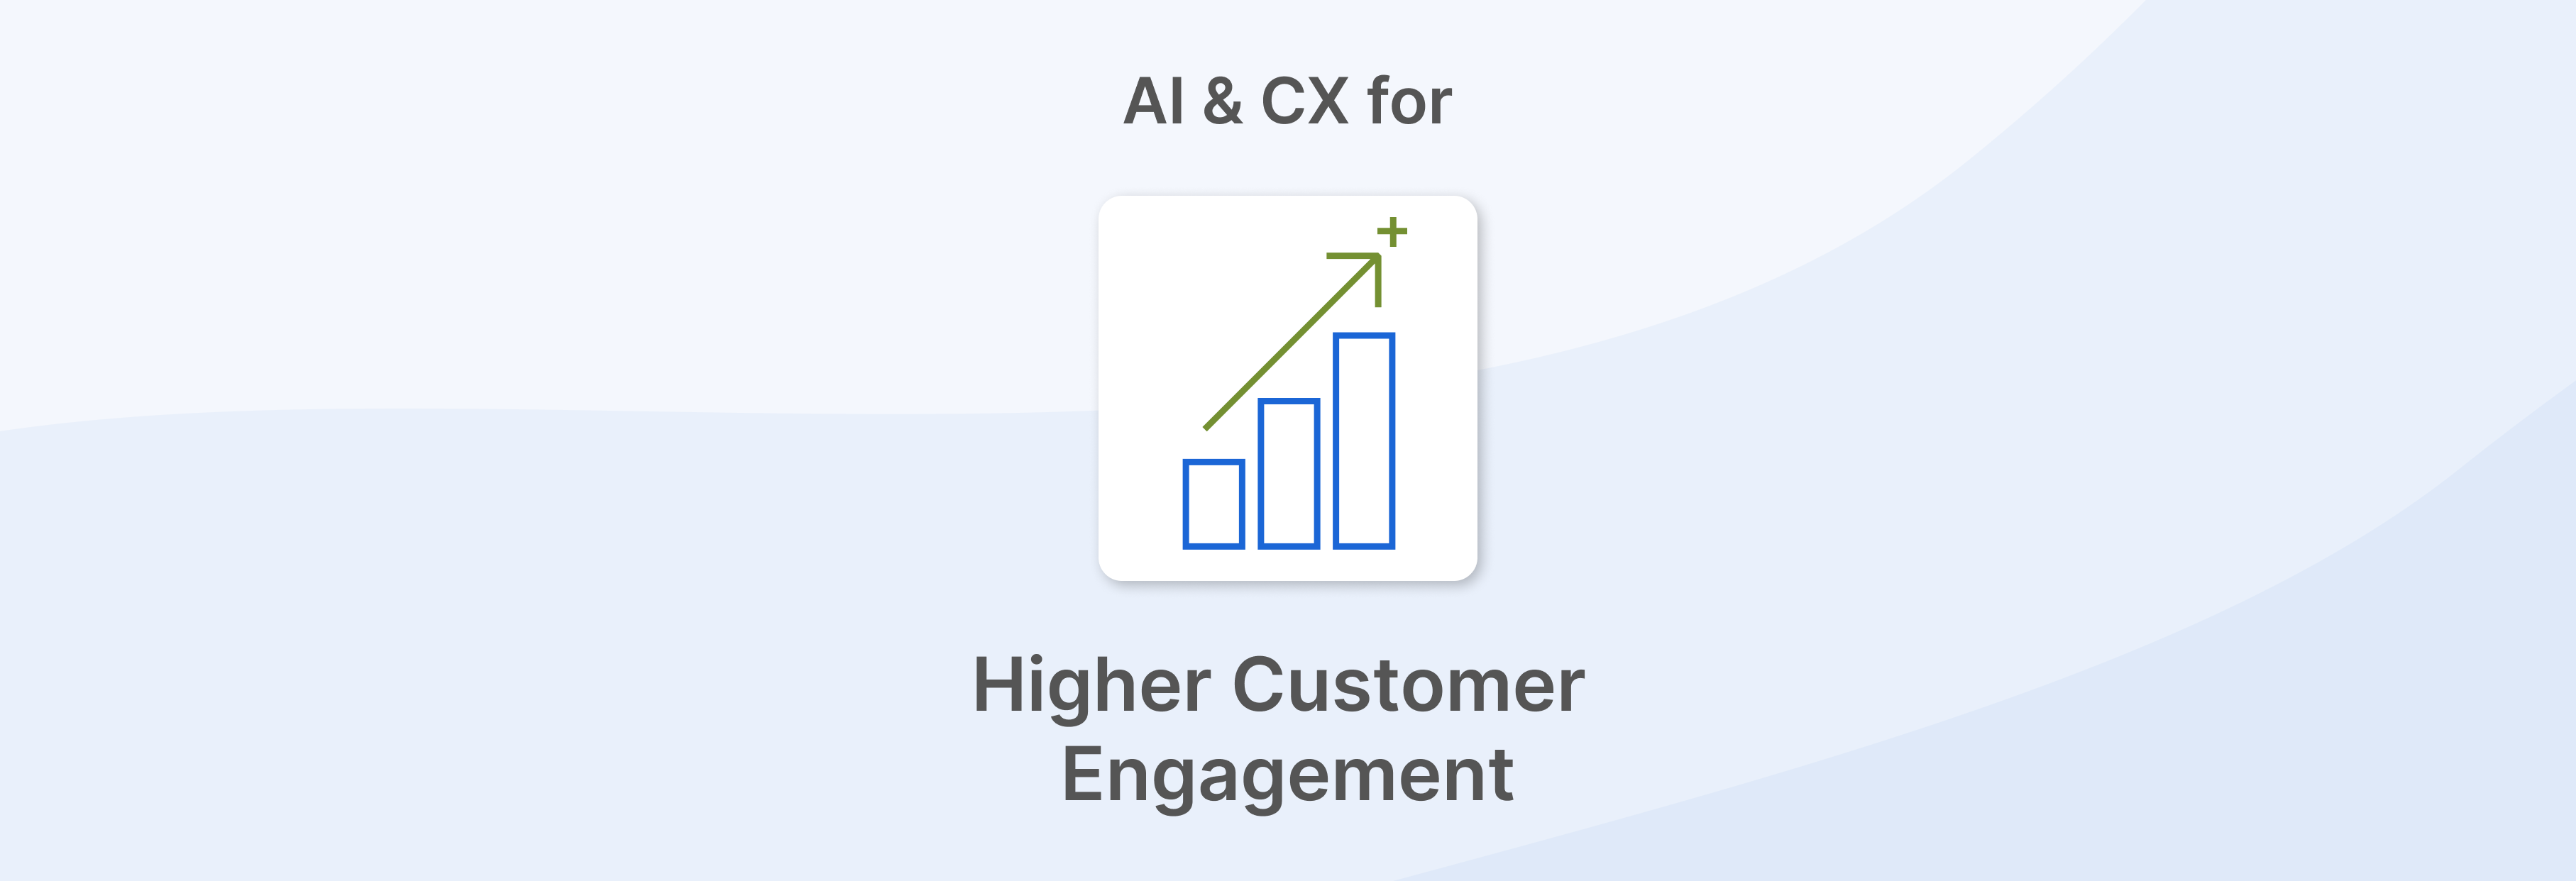 Unleashing Potential_ AI CX for Higher Customer Engagement